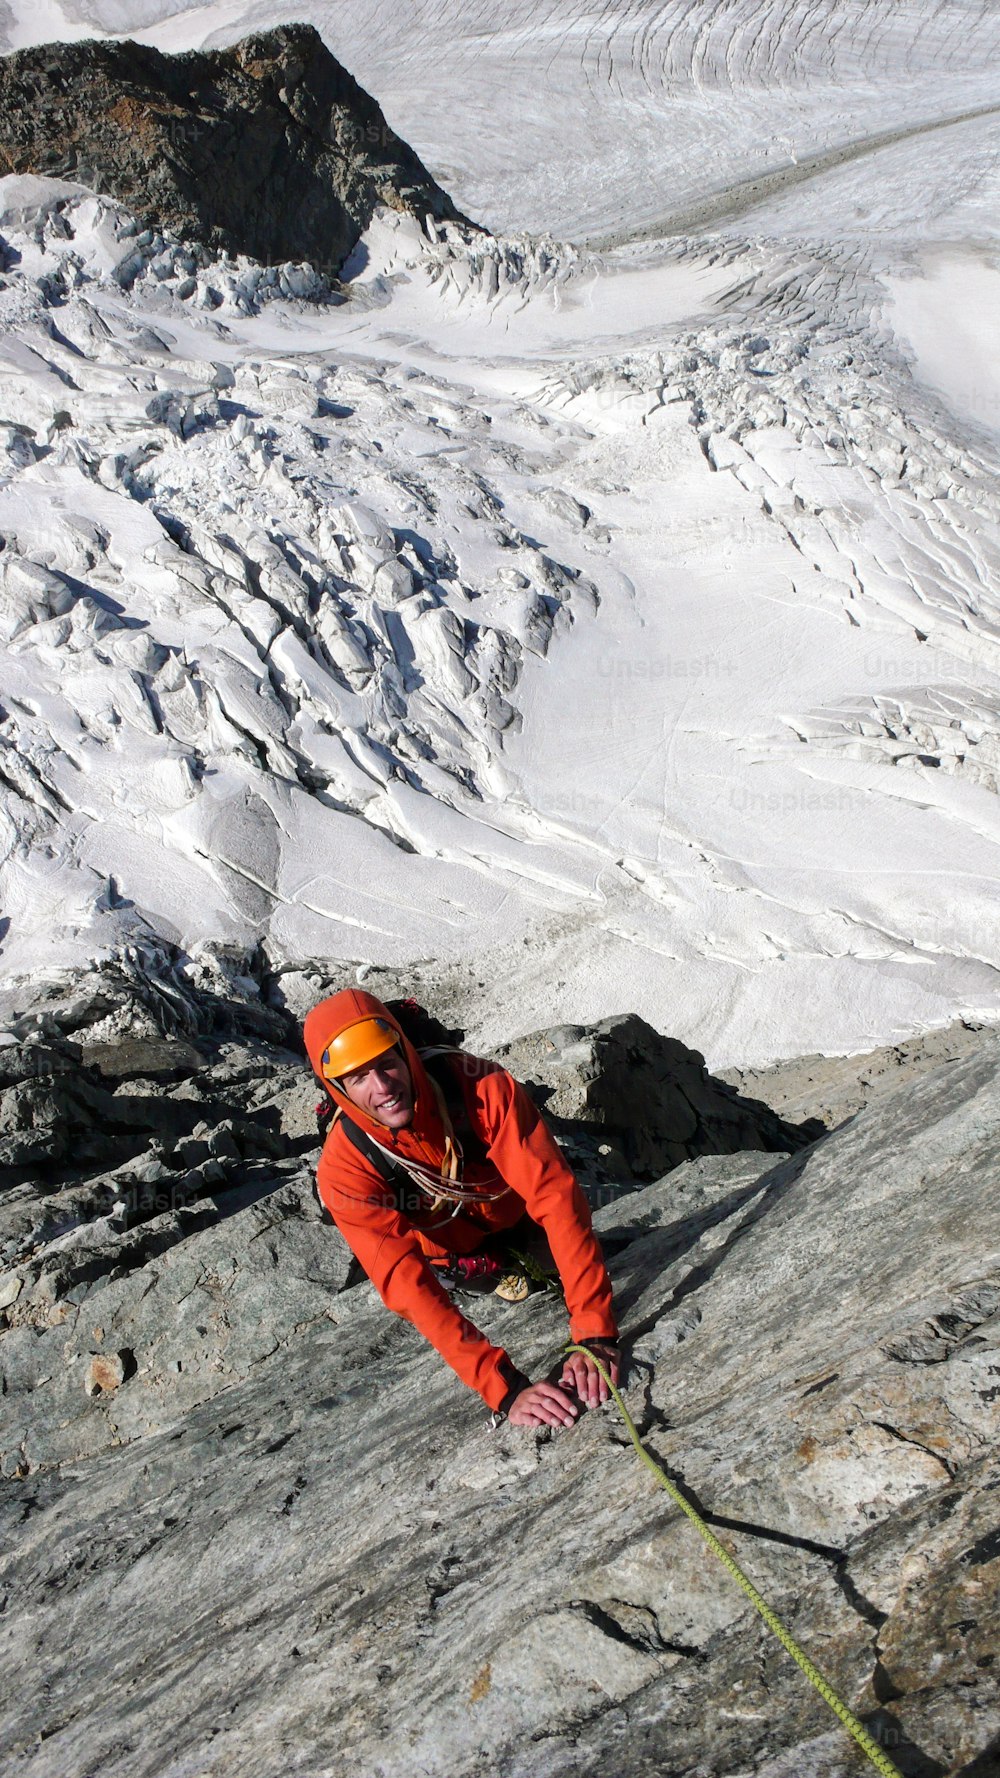 male mountain climber on an exposed climbing route high above a glacier in the Swiss Alps near St. Moritz